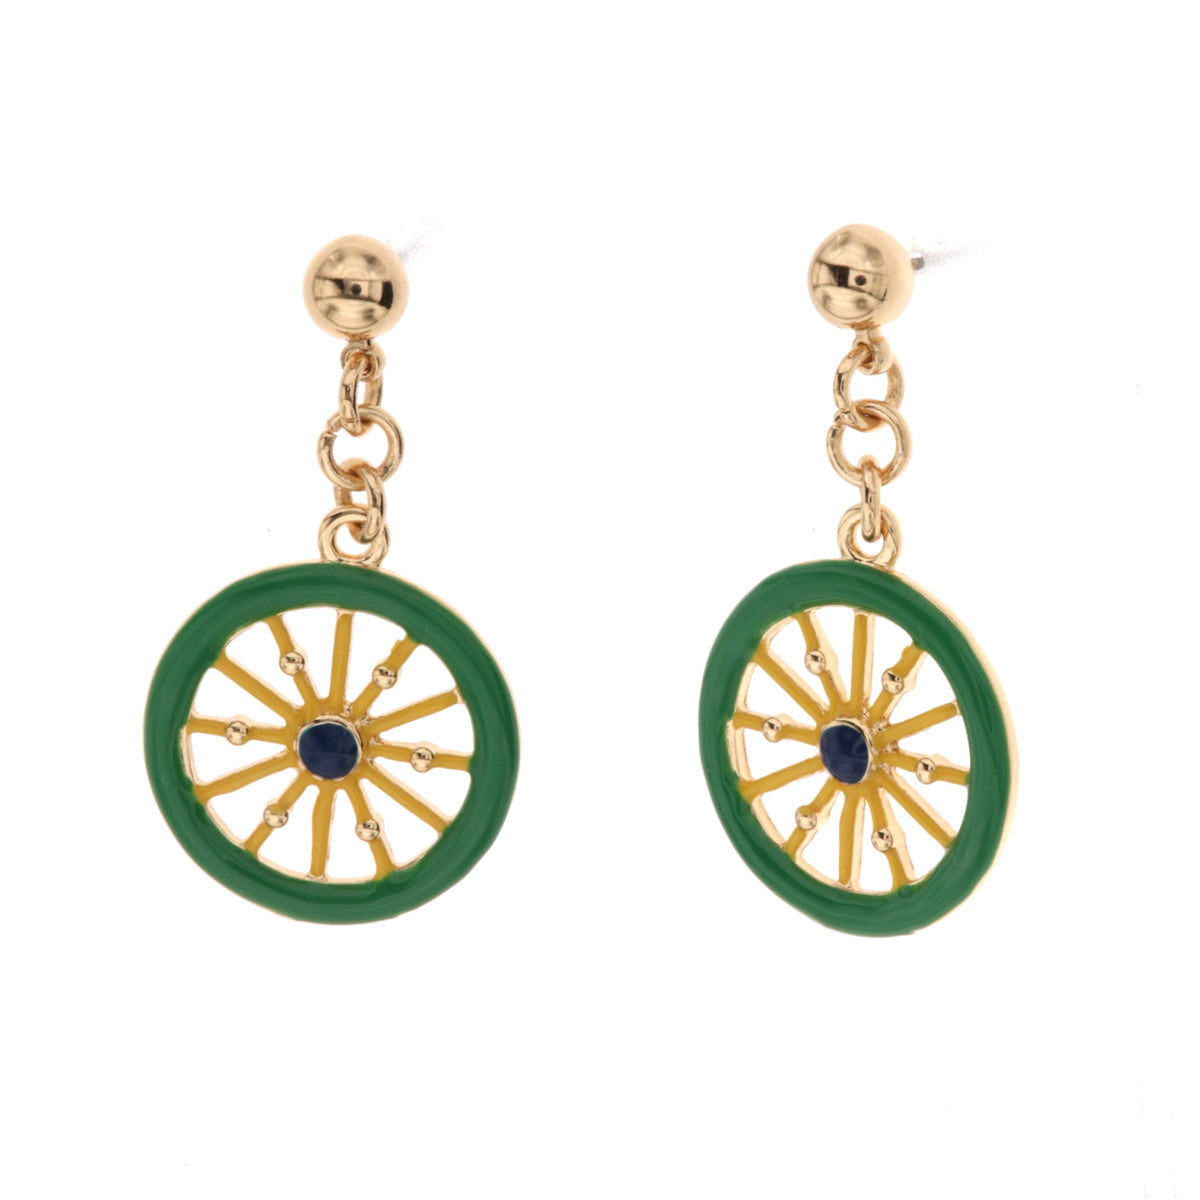 Metal earrings with wheels of the Sicilian cart and colored glazes